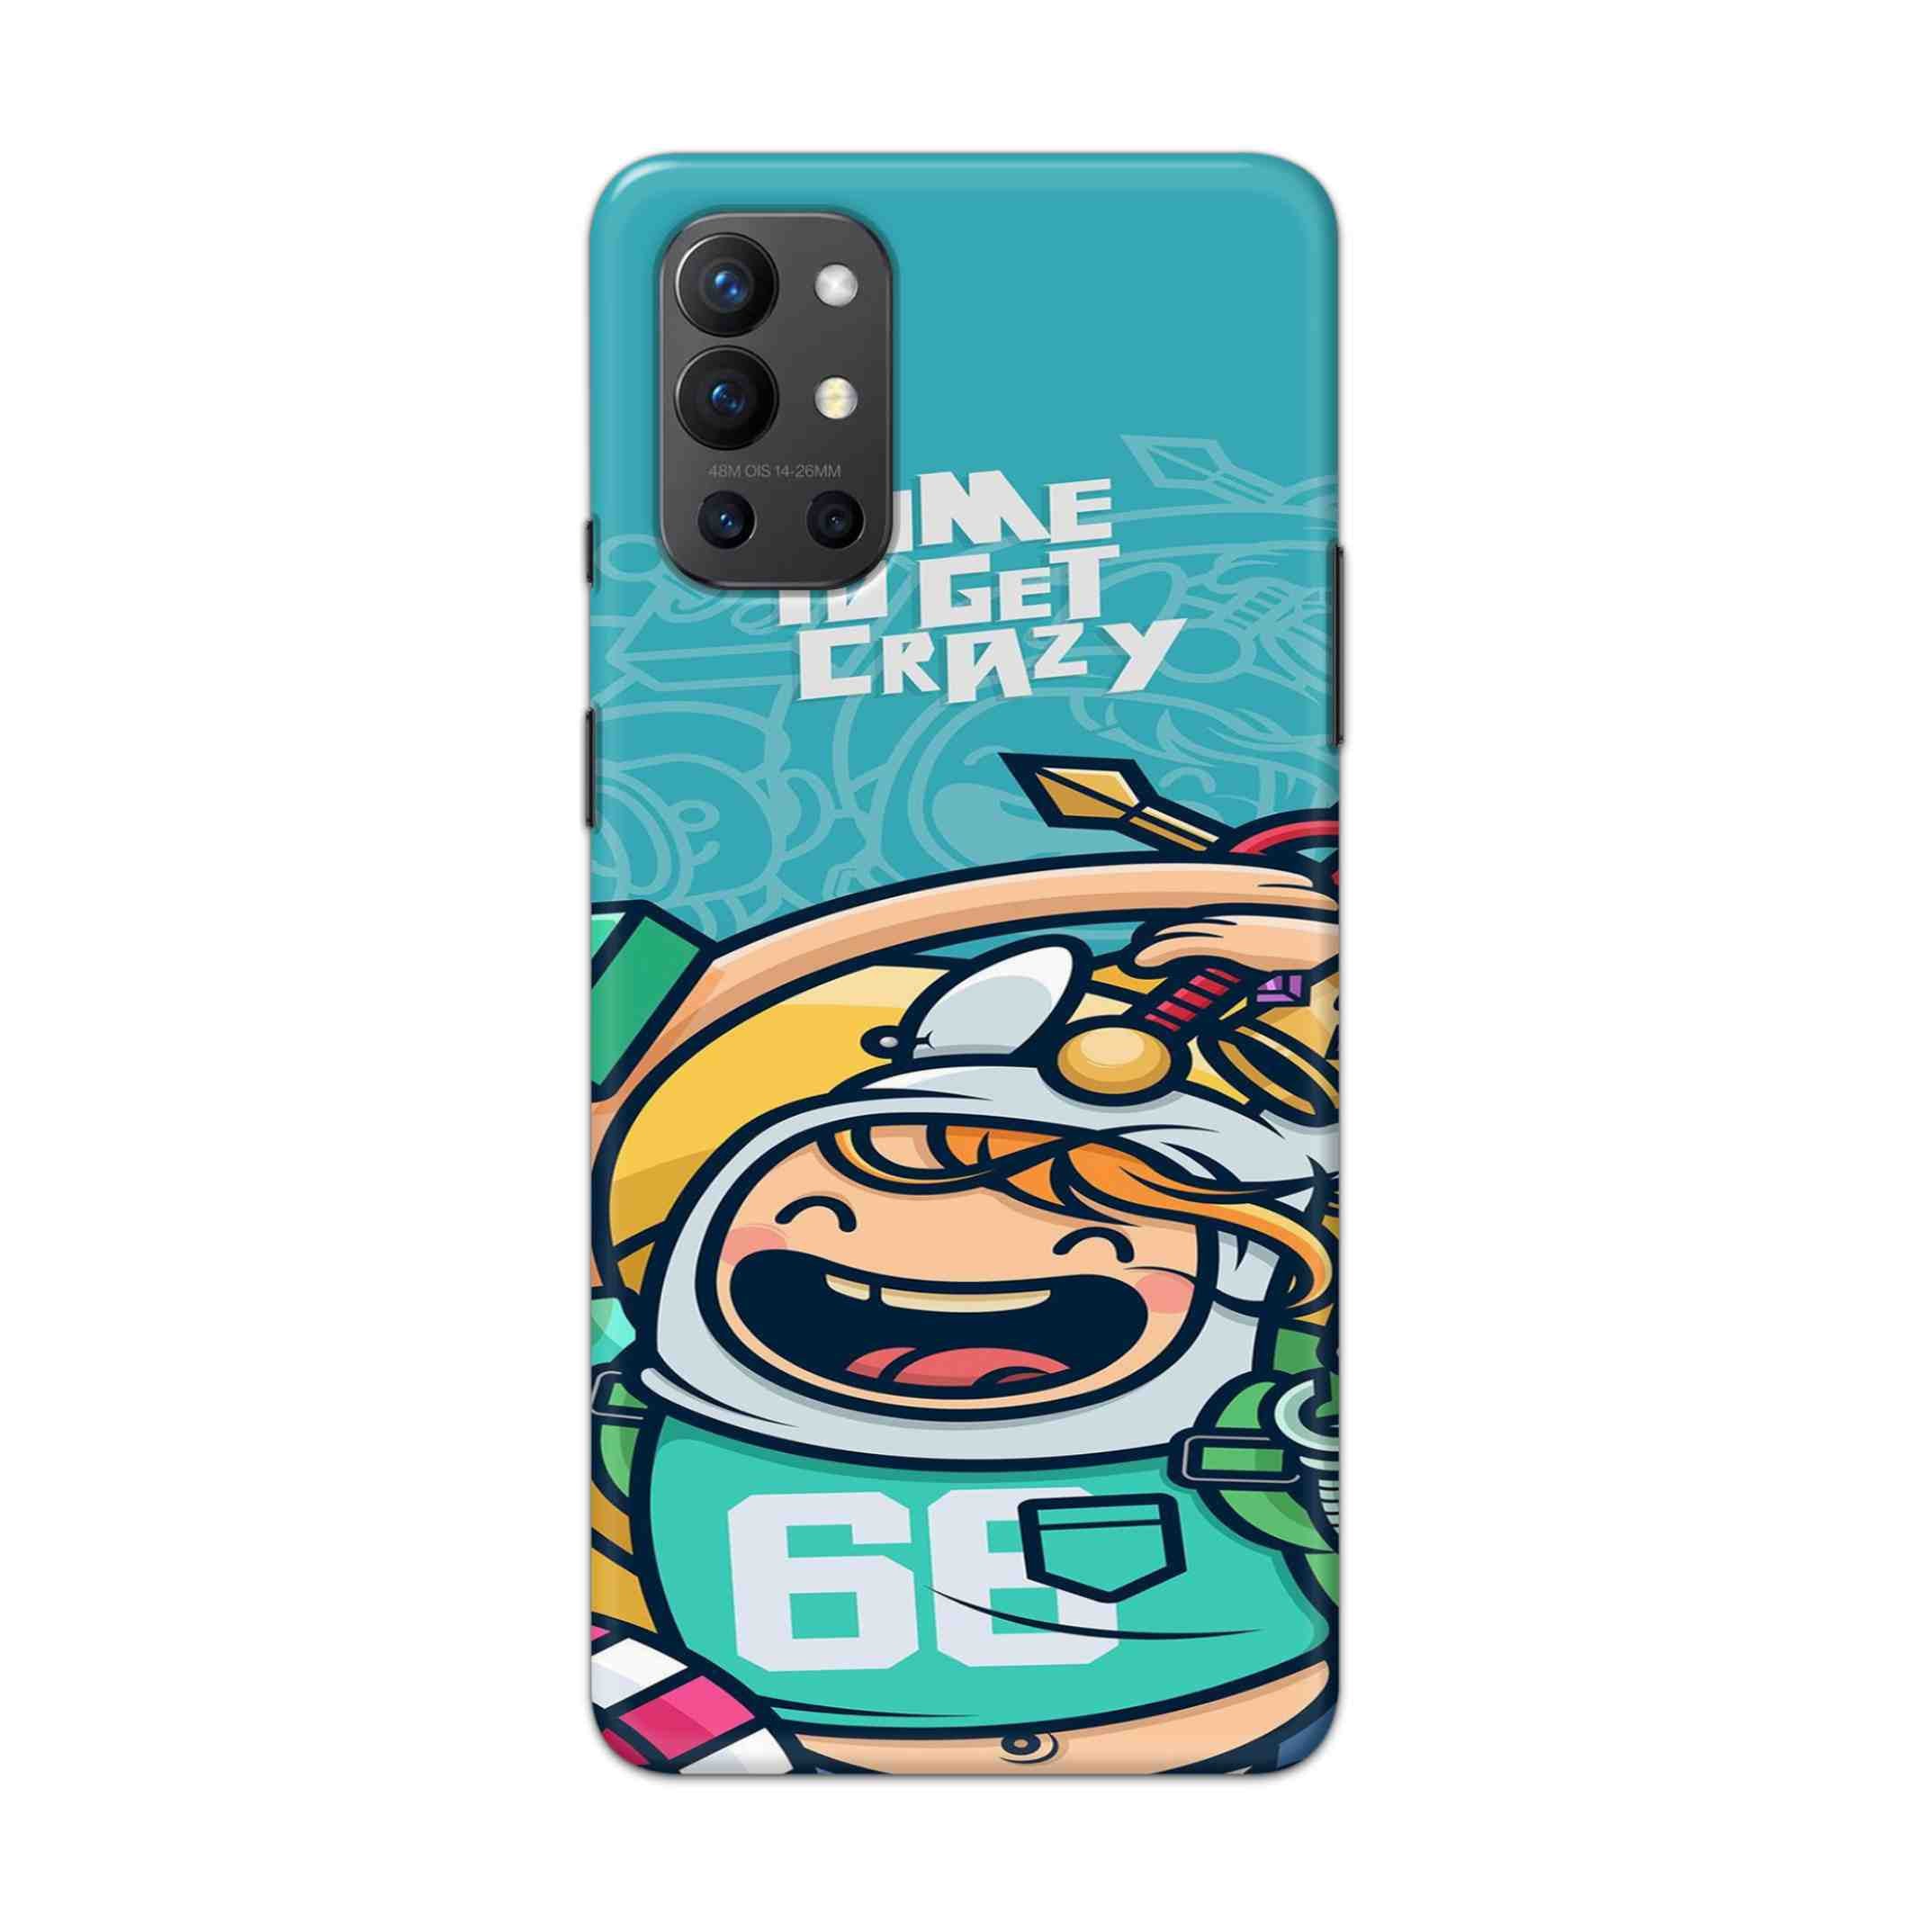 Buy Time To Get Crazy Hard Back Mobile Phone Case Cover For OnePlus 9R / 8T Online